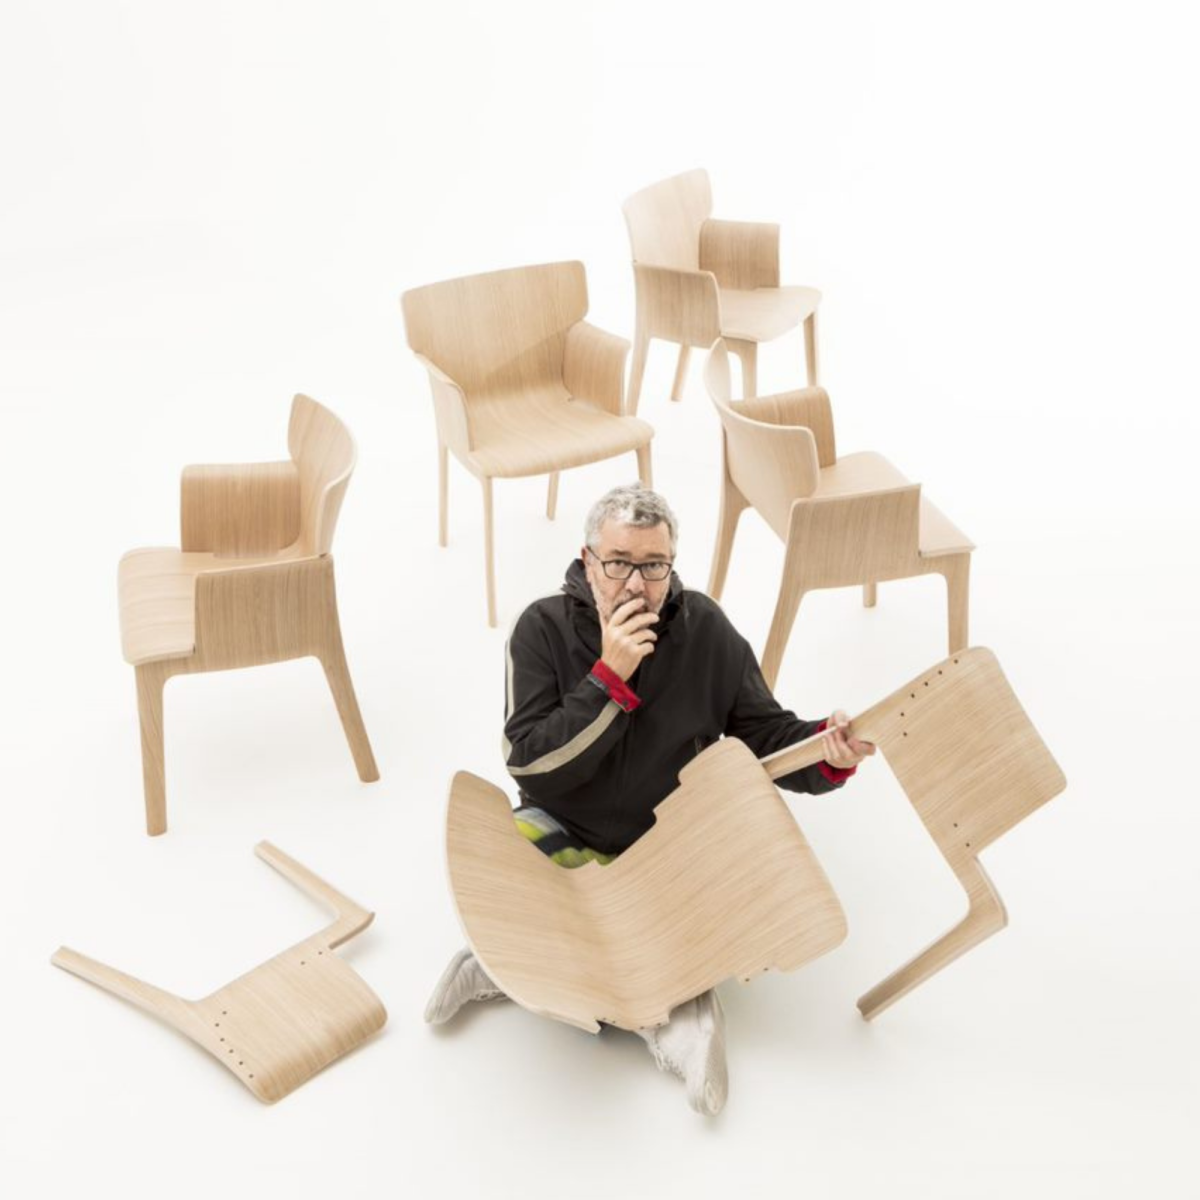 Visionary designer Philippe Starck collaborates with Andreu World